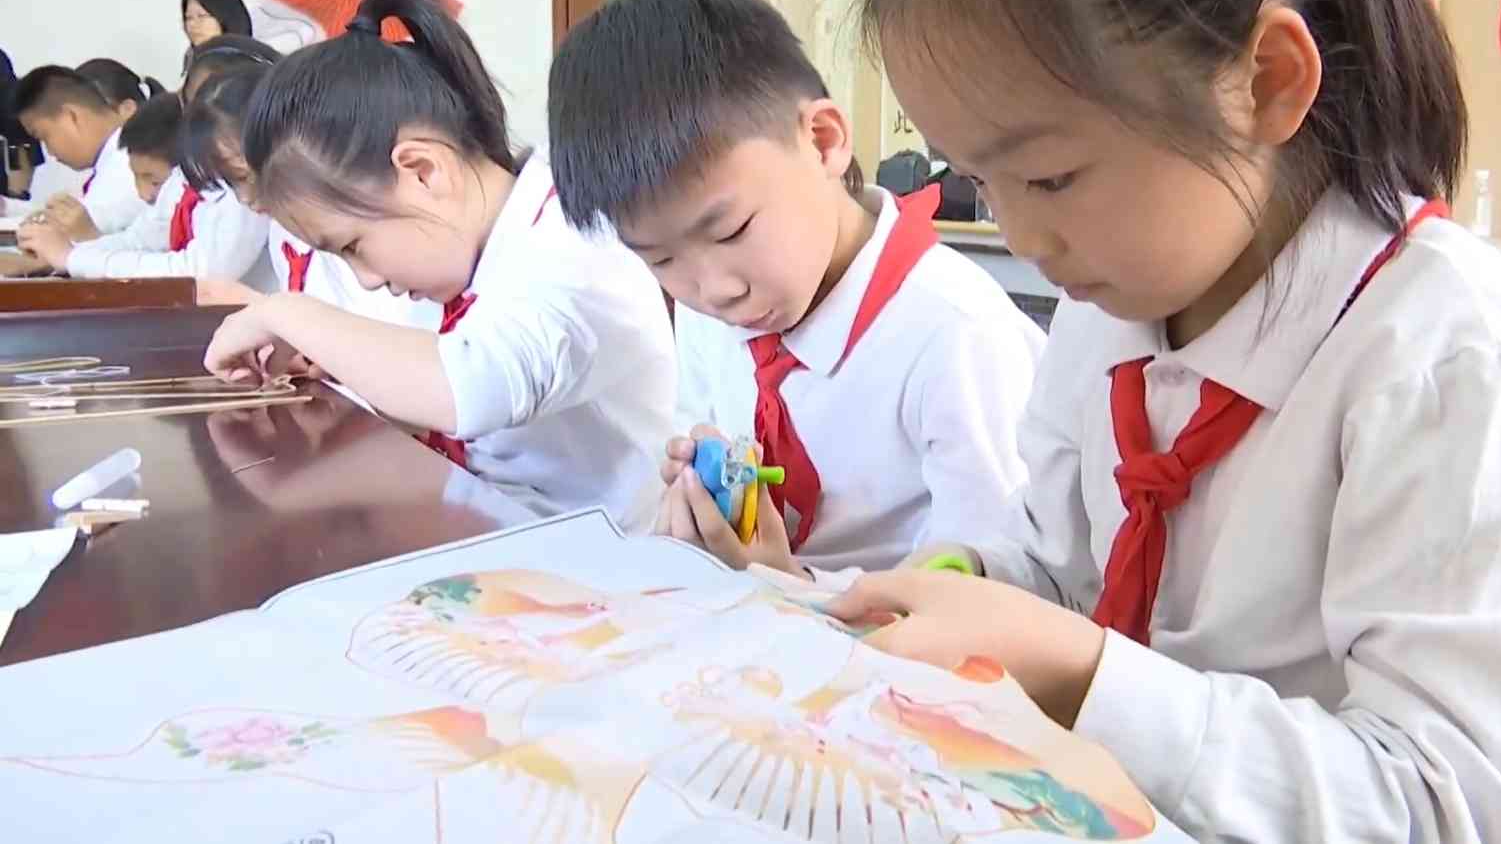  Shijiazhuang, Hebei: Putting Paper Kites in Spring with Elegant Interest in Childhood